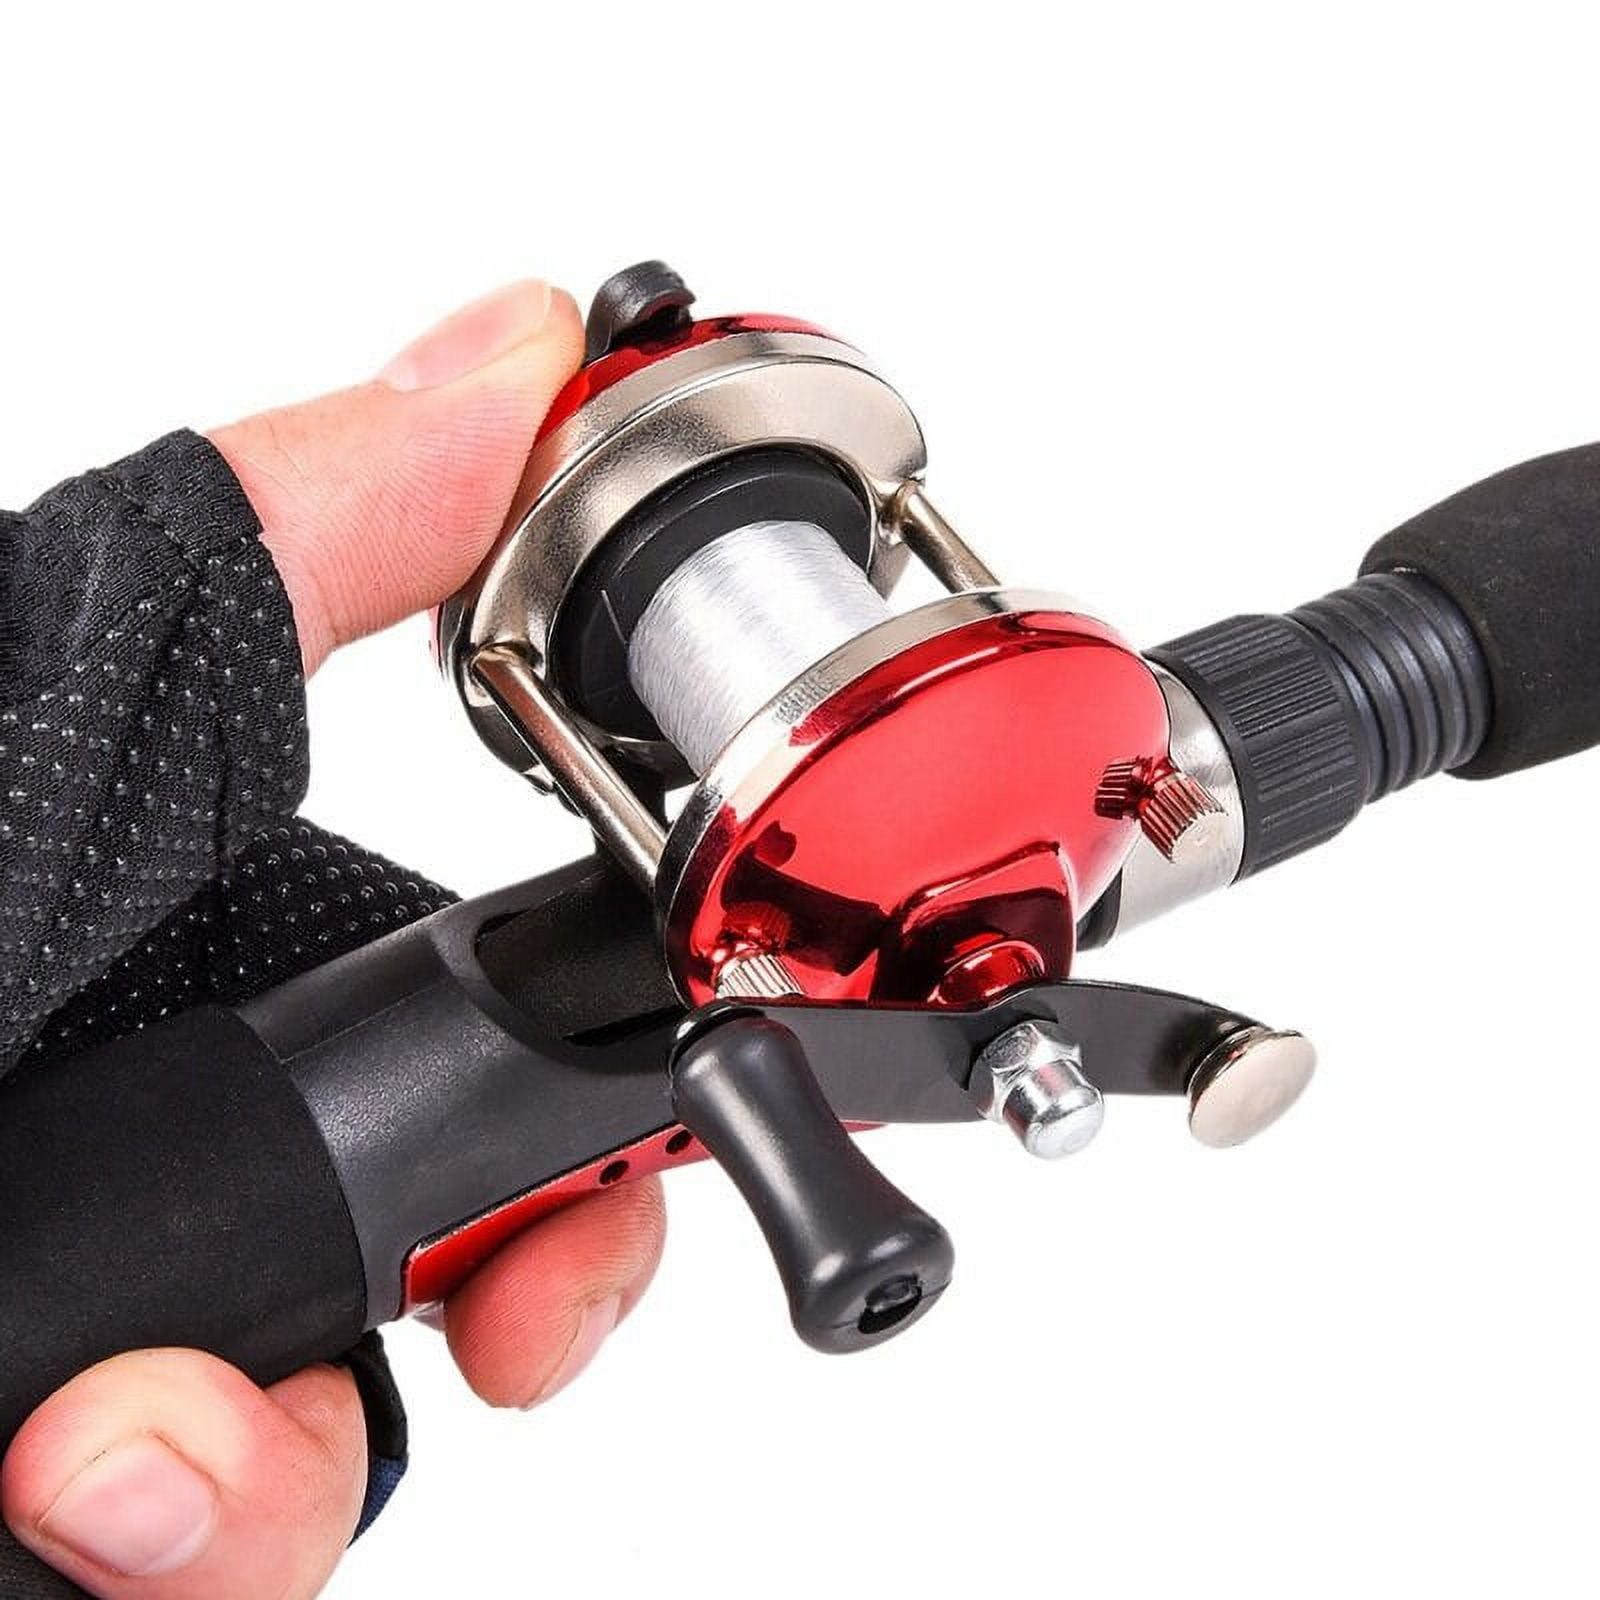 2018 Hot Sell50M Wire Mini Metal Bait Casting Spinning Boat Ice Fishing Reel  Fish Water Wheel Baitcast Roller Coil Red Blue 